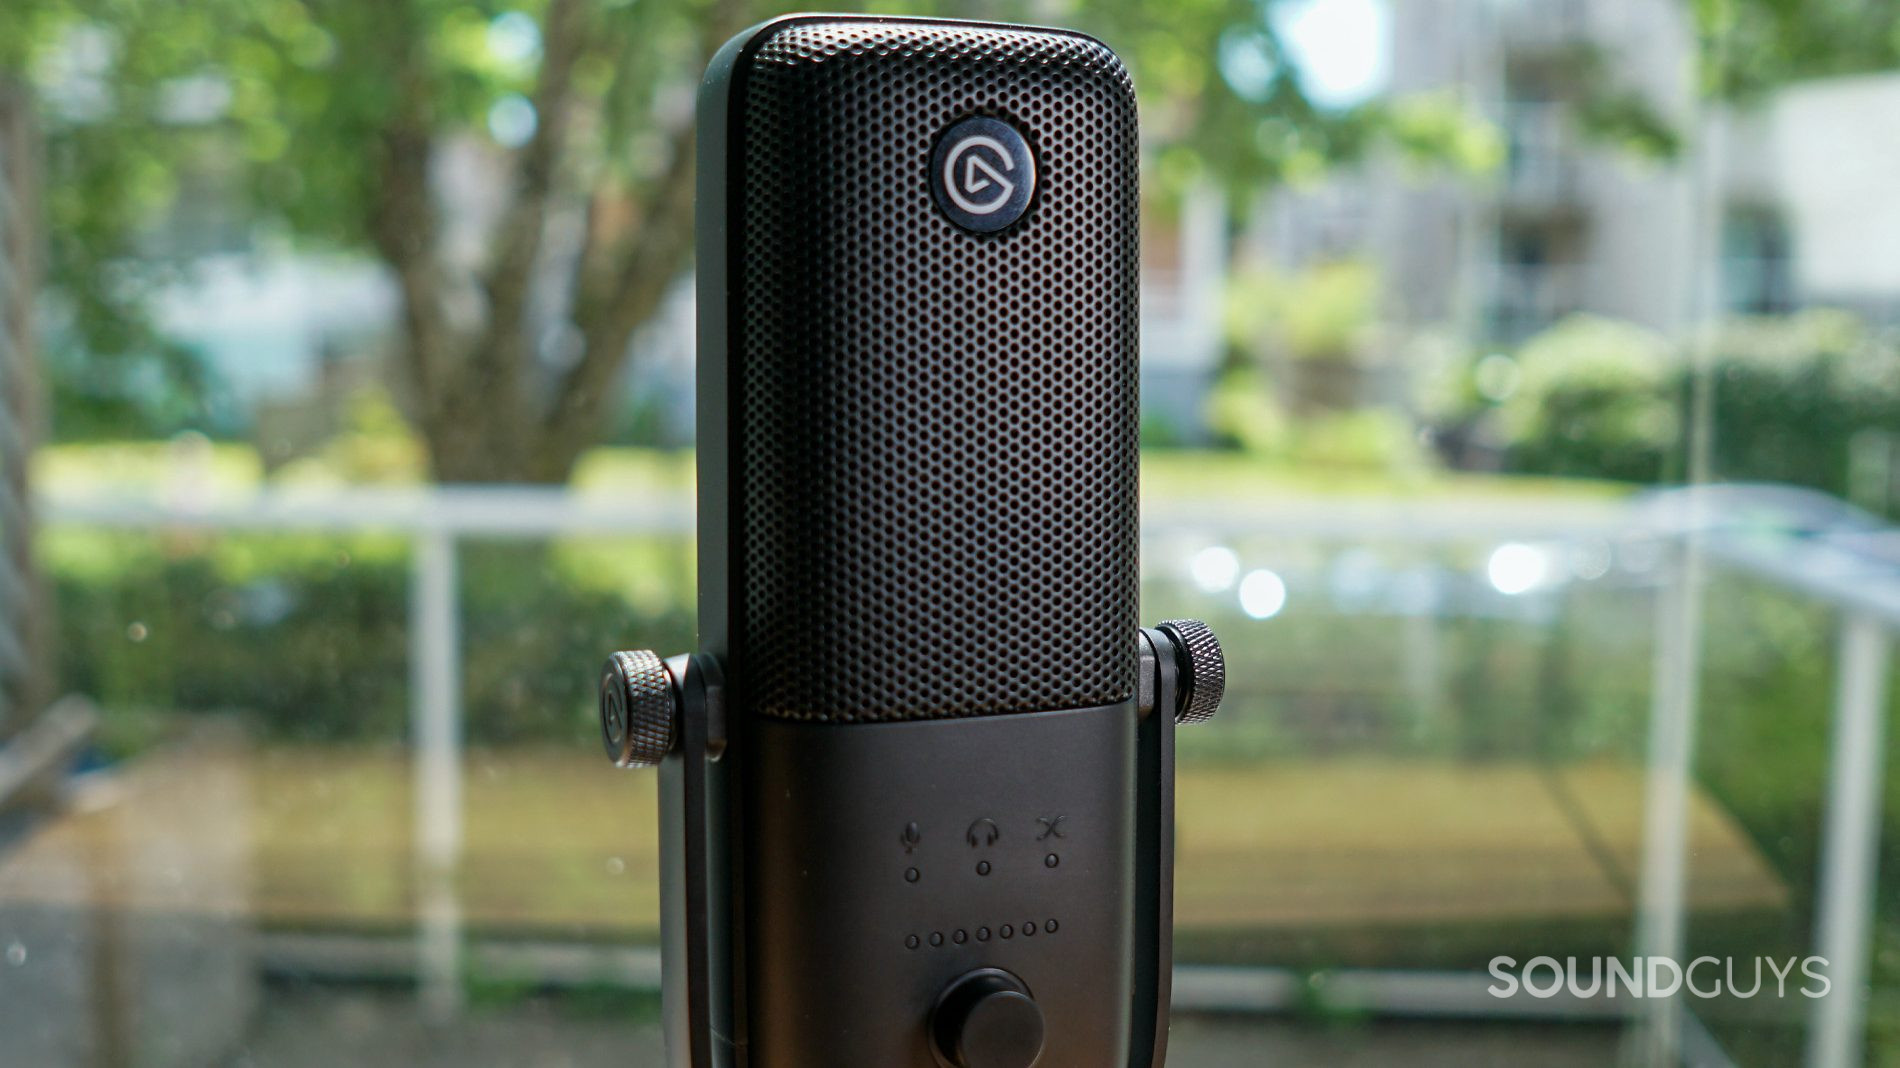 The Elgato Wave:3 microphone in black against an outdoor setting.